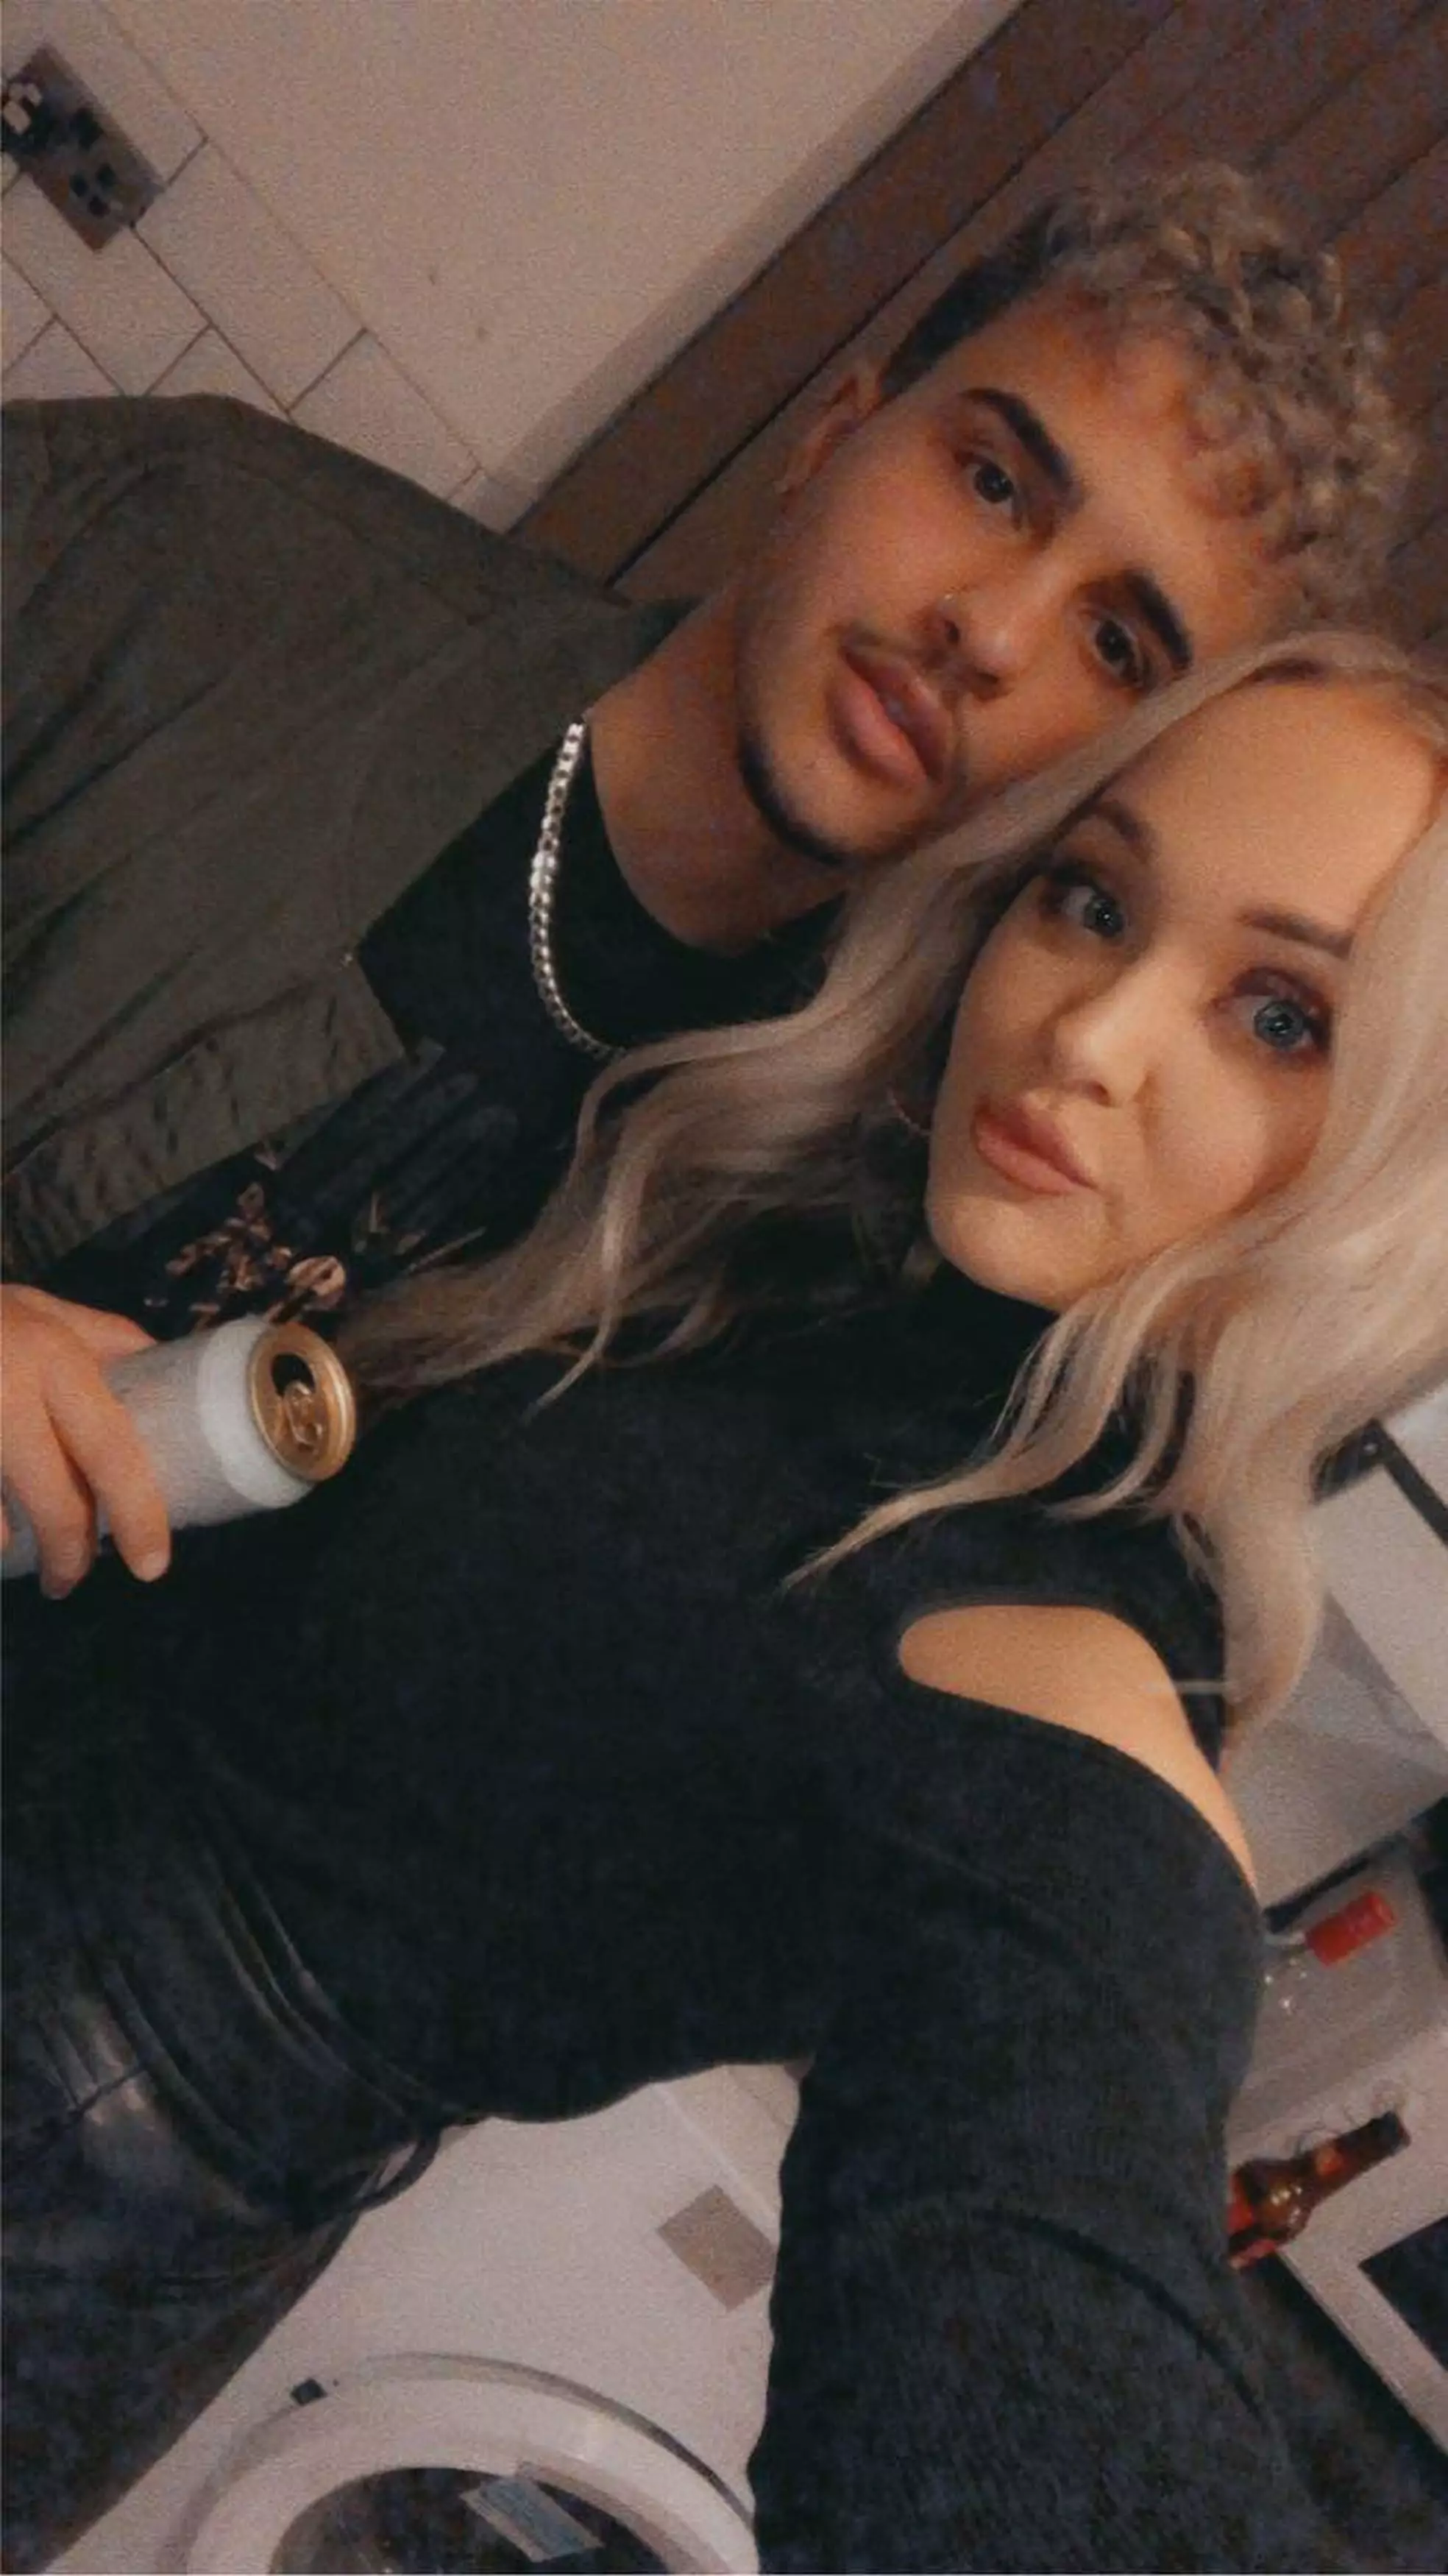 Ellie would even wear foundation in makeup with her boyfriend (